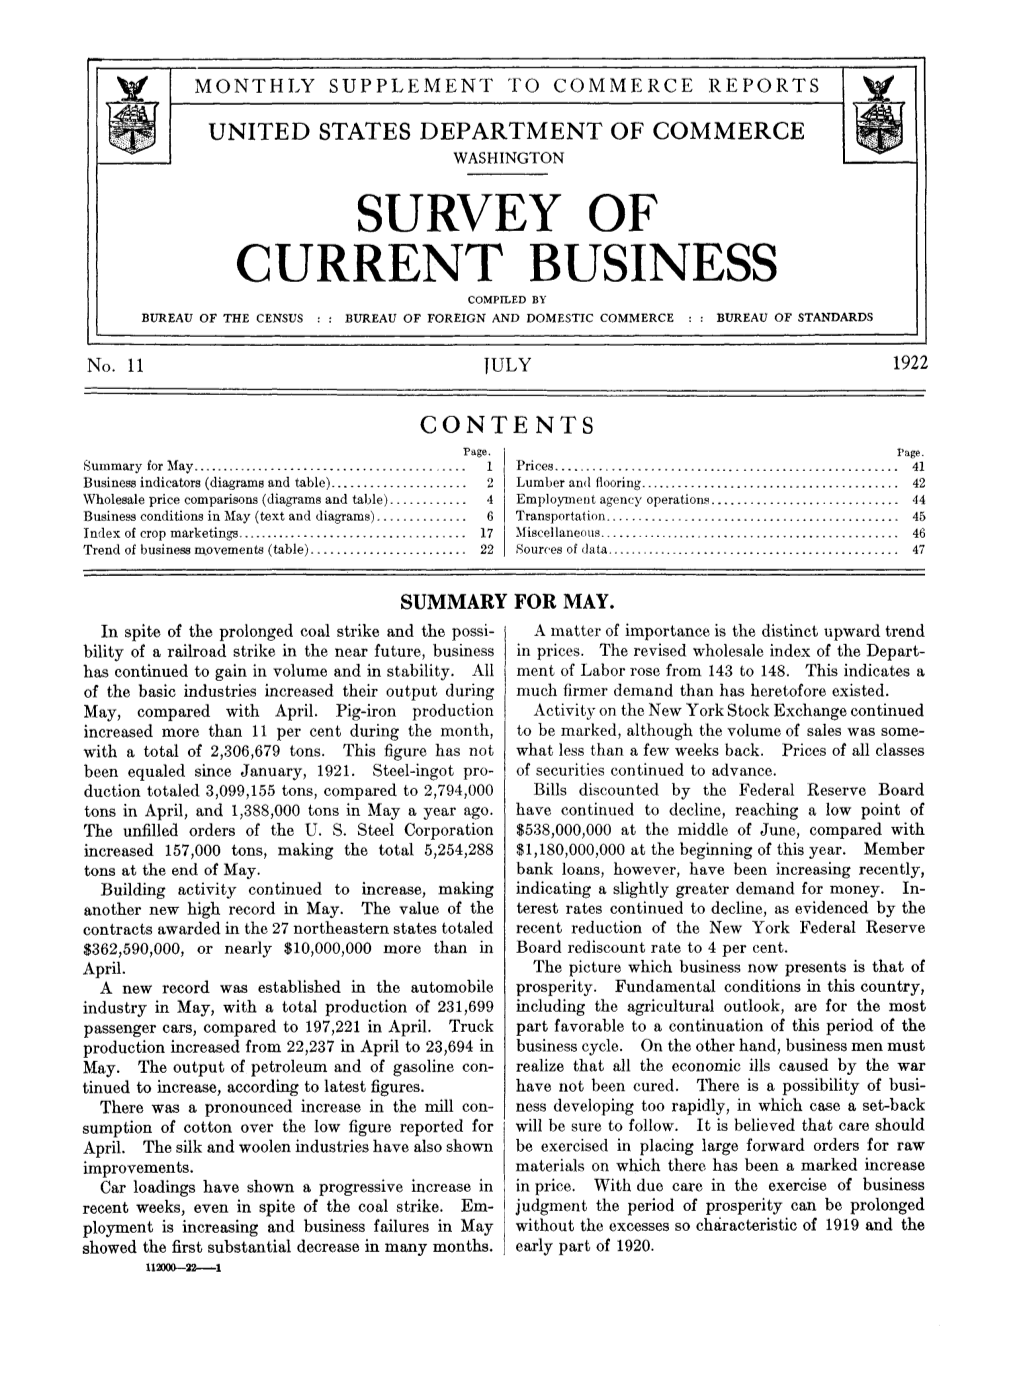 Survey of Current Business July 1922